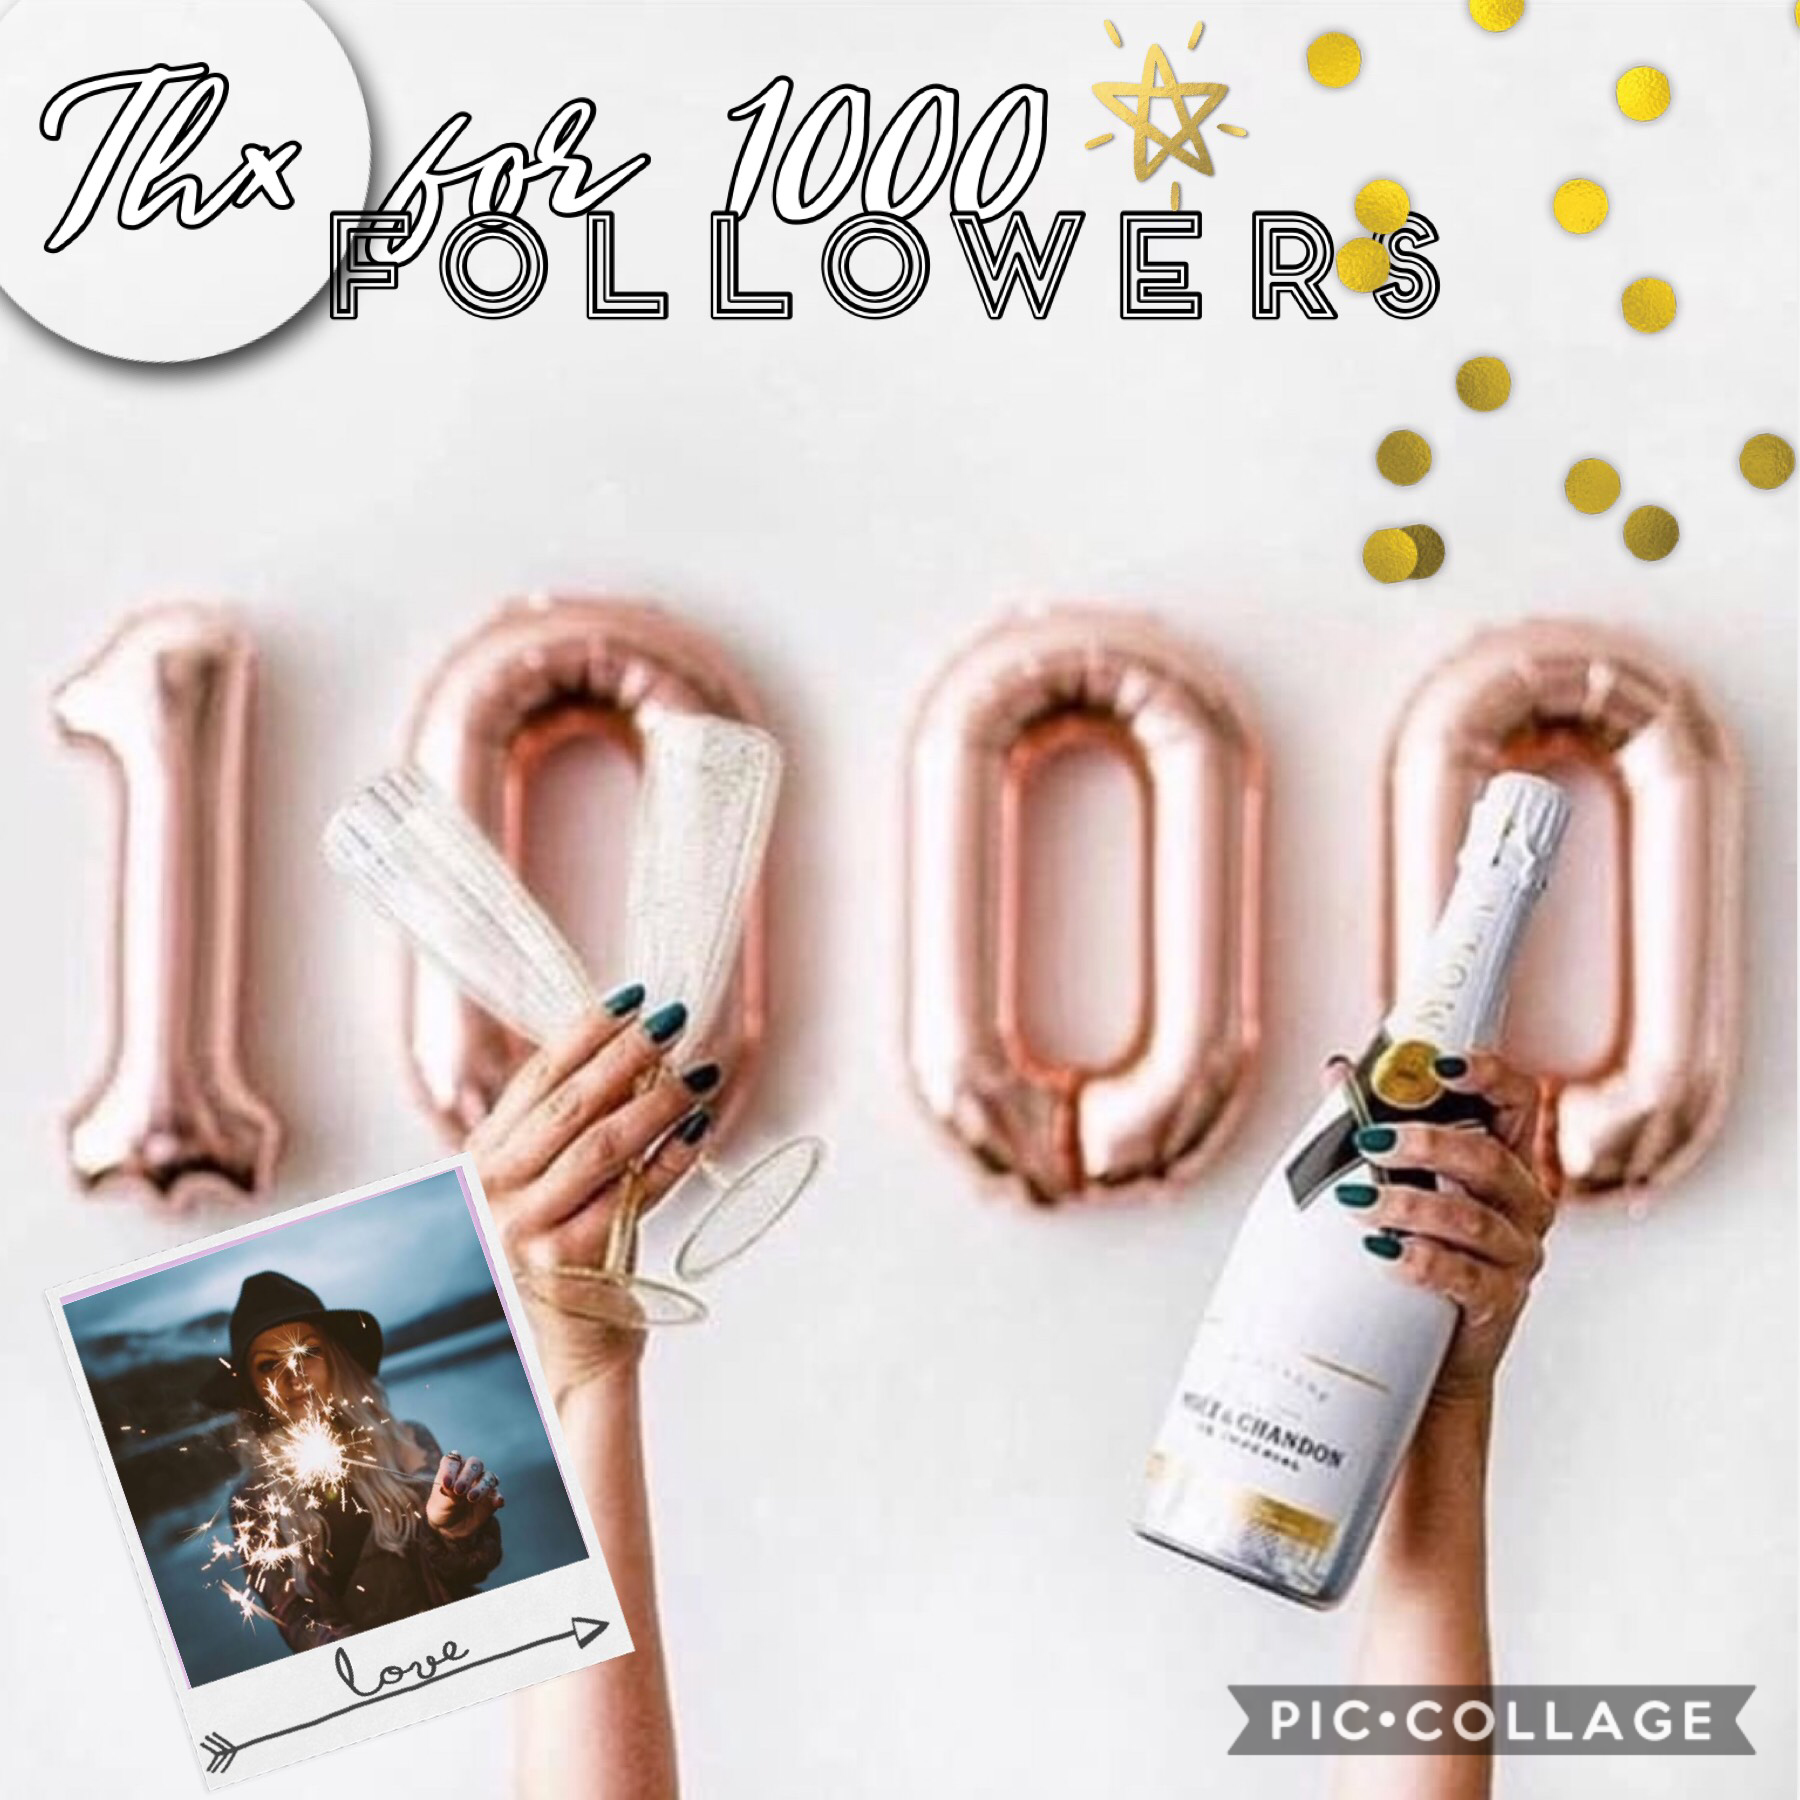 THANK YOU SO MUCH FOR 1000 FOLLOWERS!😘🤩❤️I never ever thought I’d get to 1000 followers! Thank you so much everyone who has supported me, and helped me get here!😘🌹❤️🥳